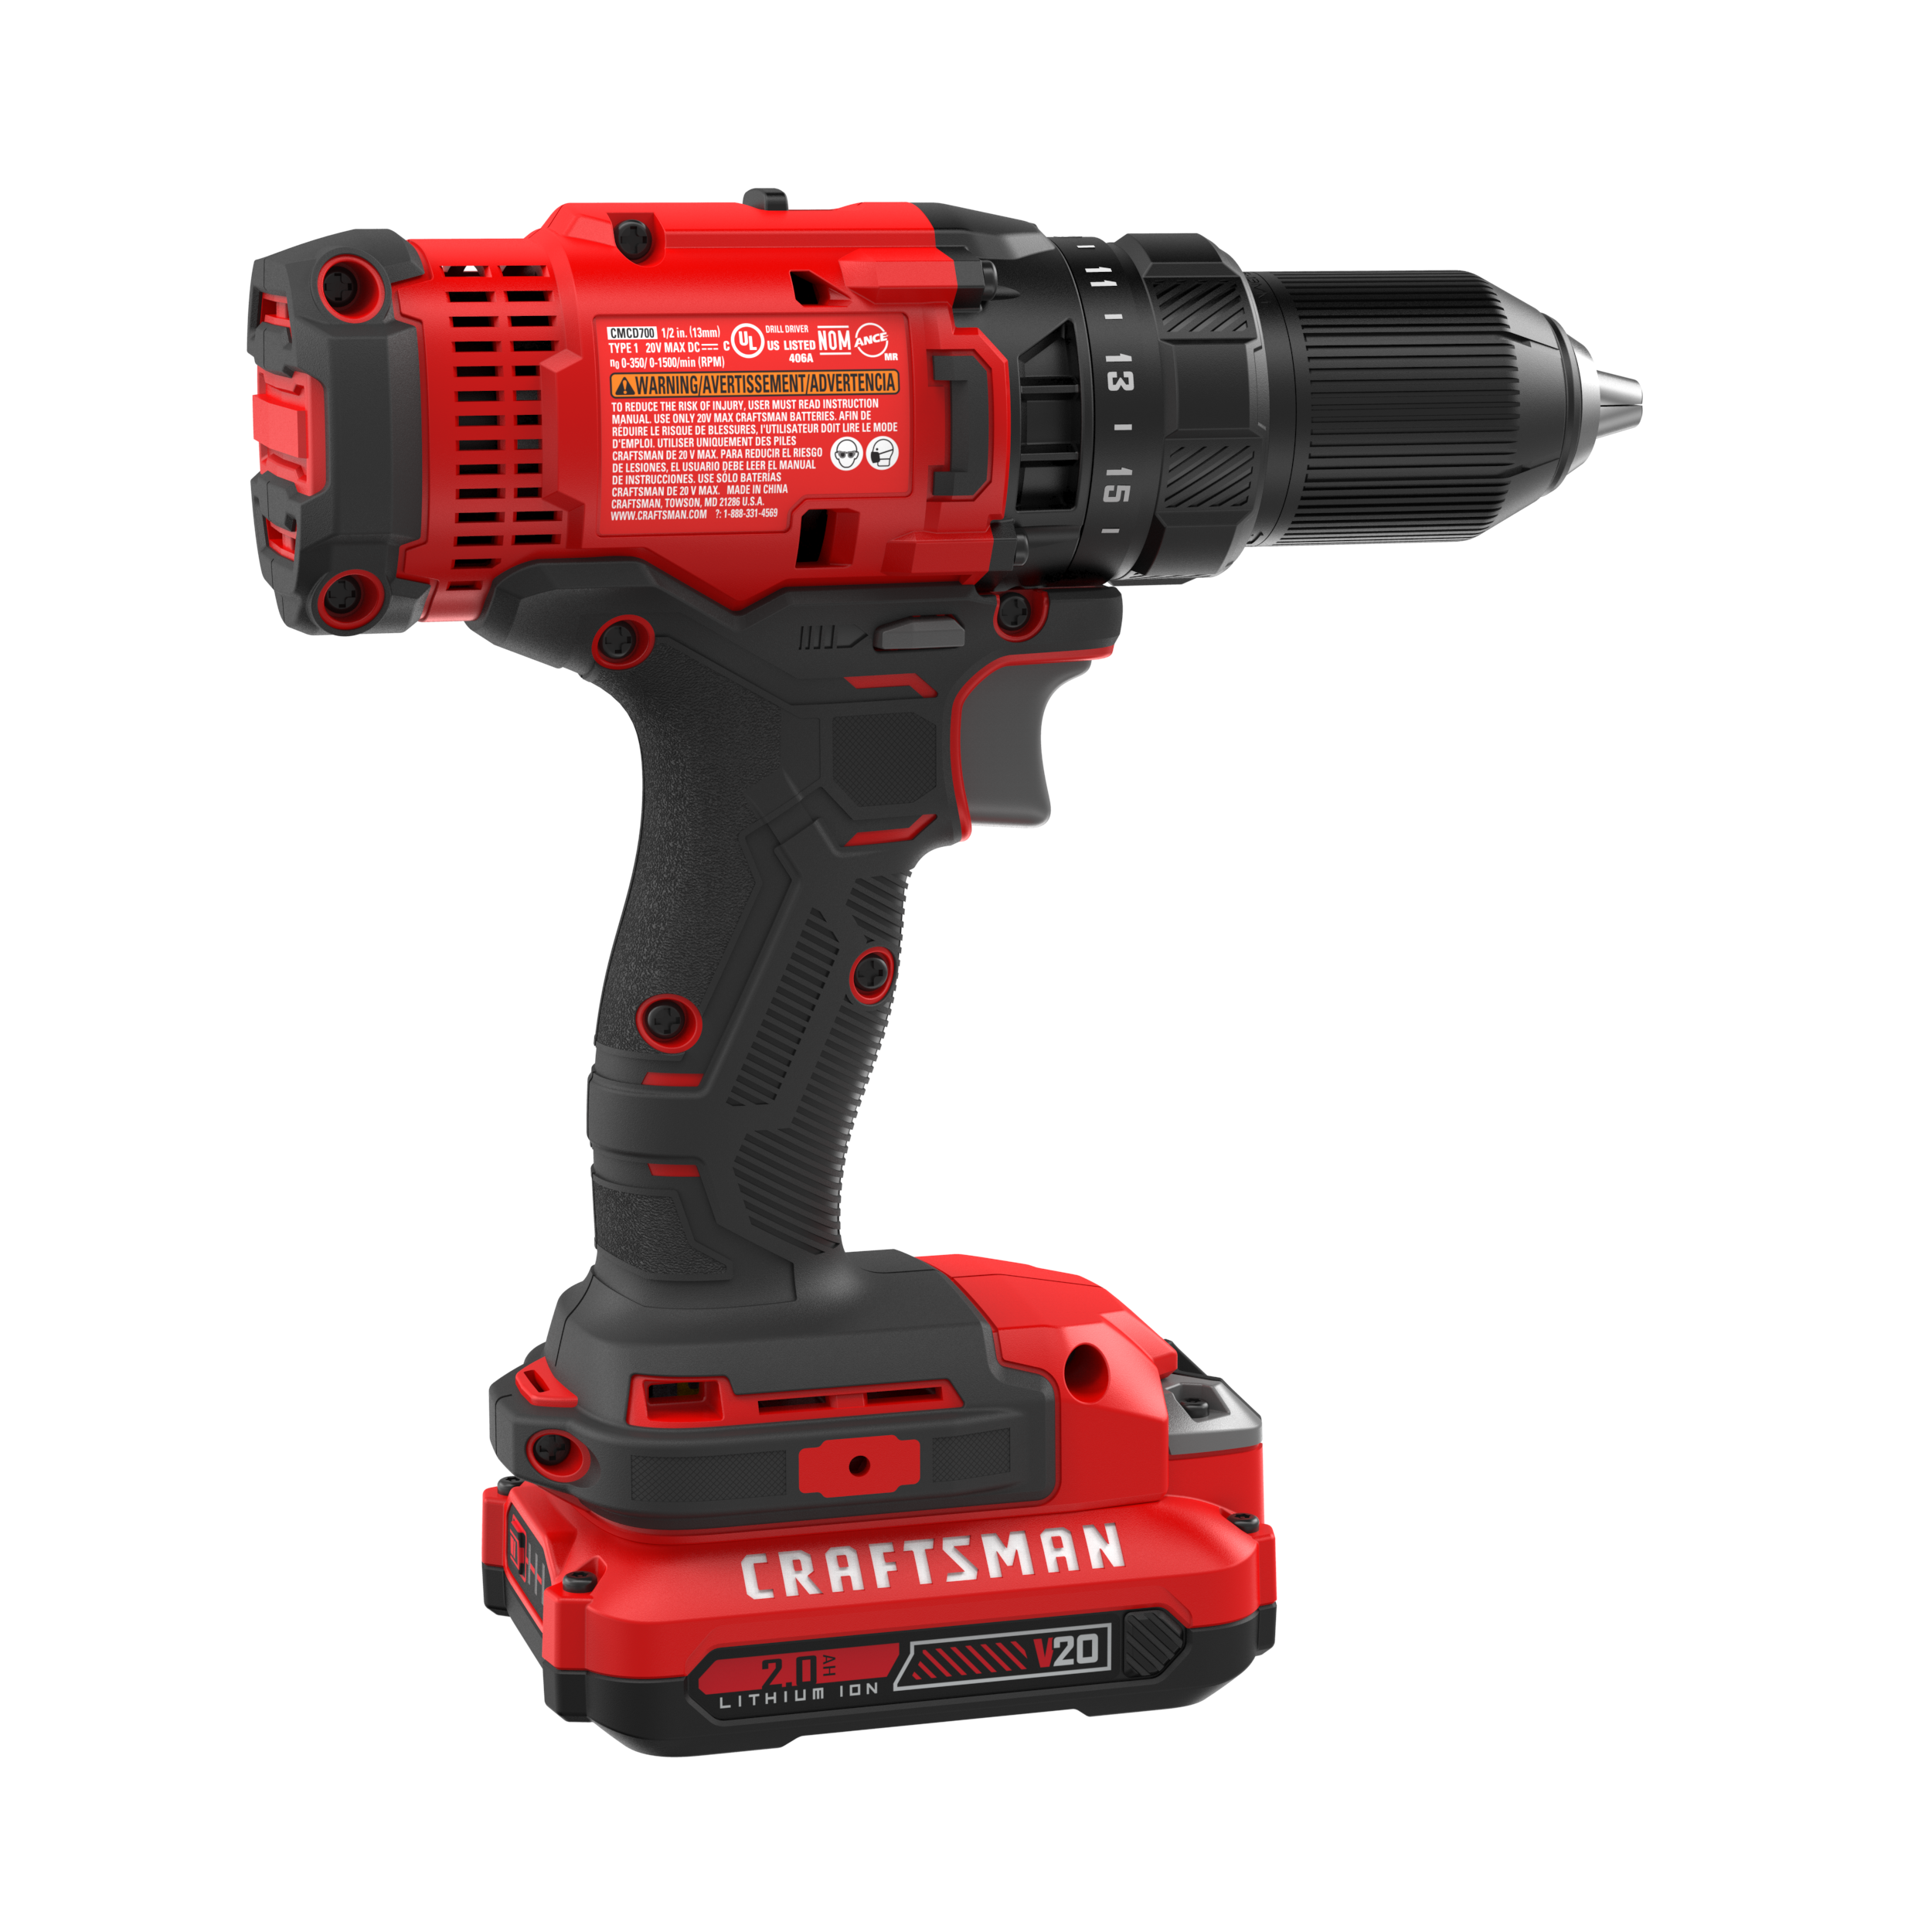 V20* Cordless 1/2-in Drill/Driver Kit (1 Battery) | CRAFTSMAN